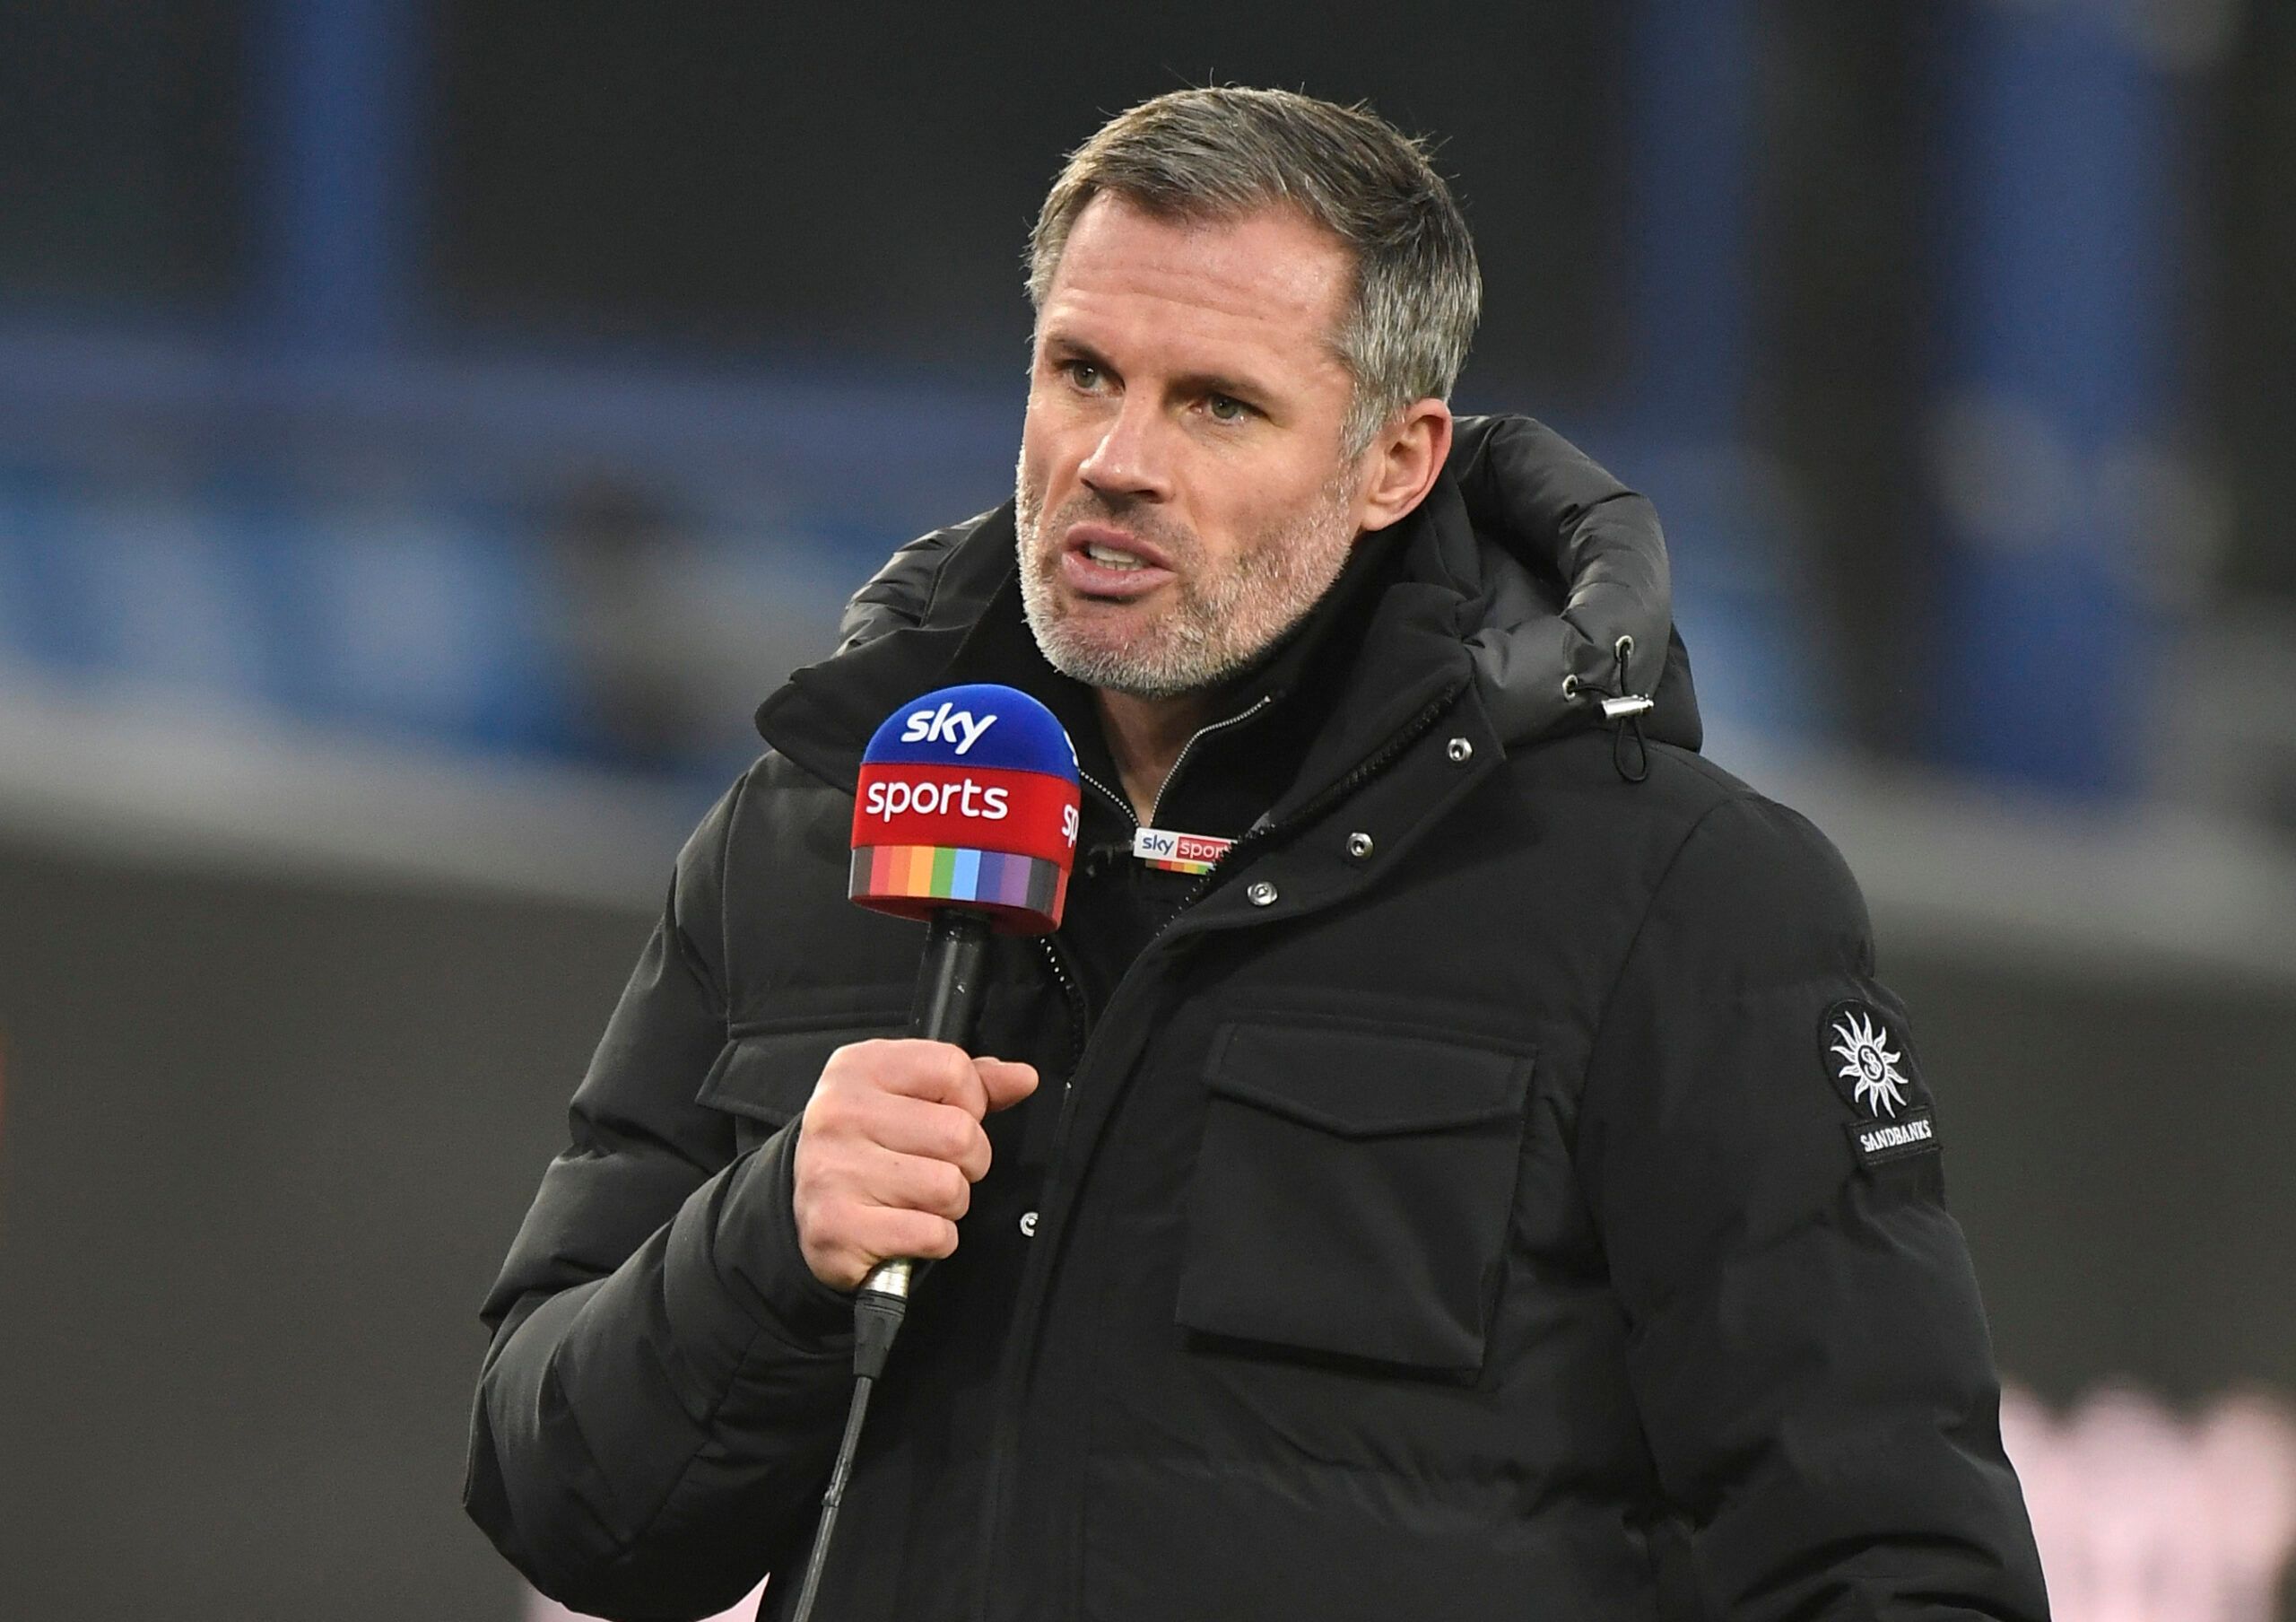 Jamie Carragher has hit out at England fans after their chants at Gareth Southgate in Hungary loss